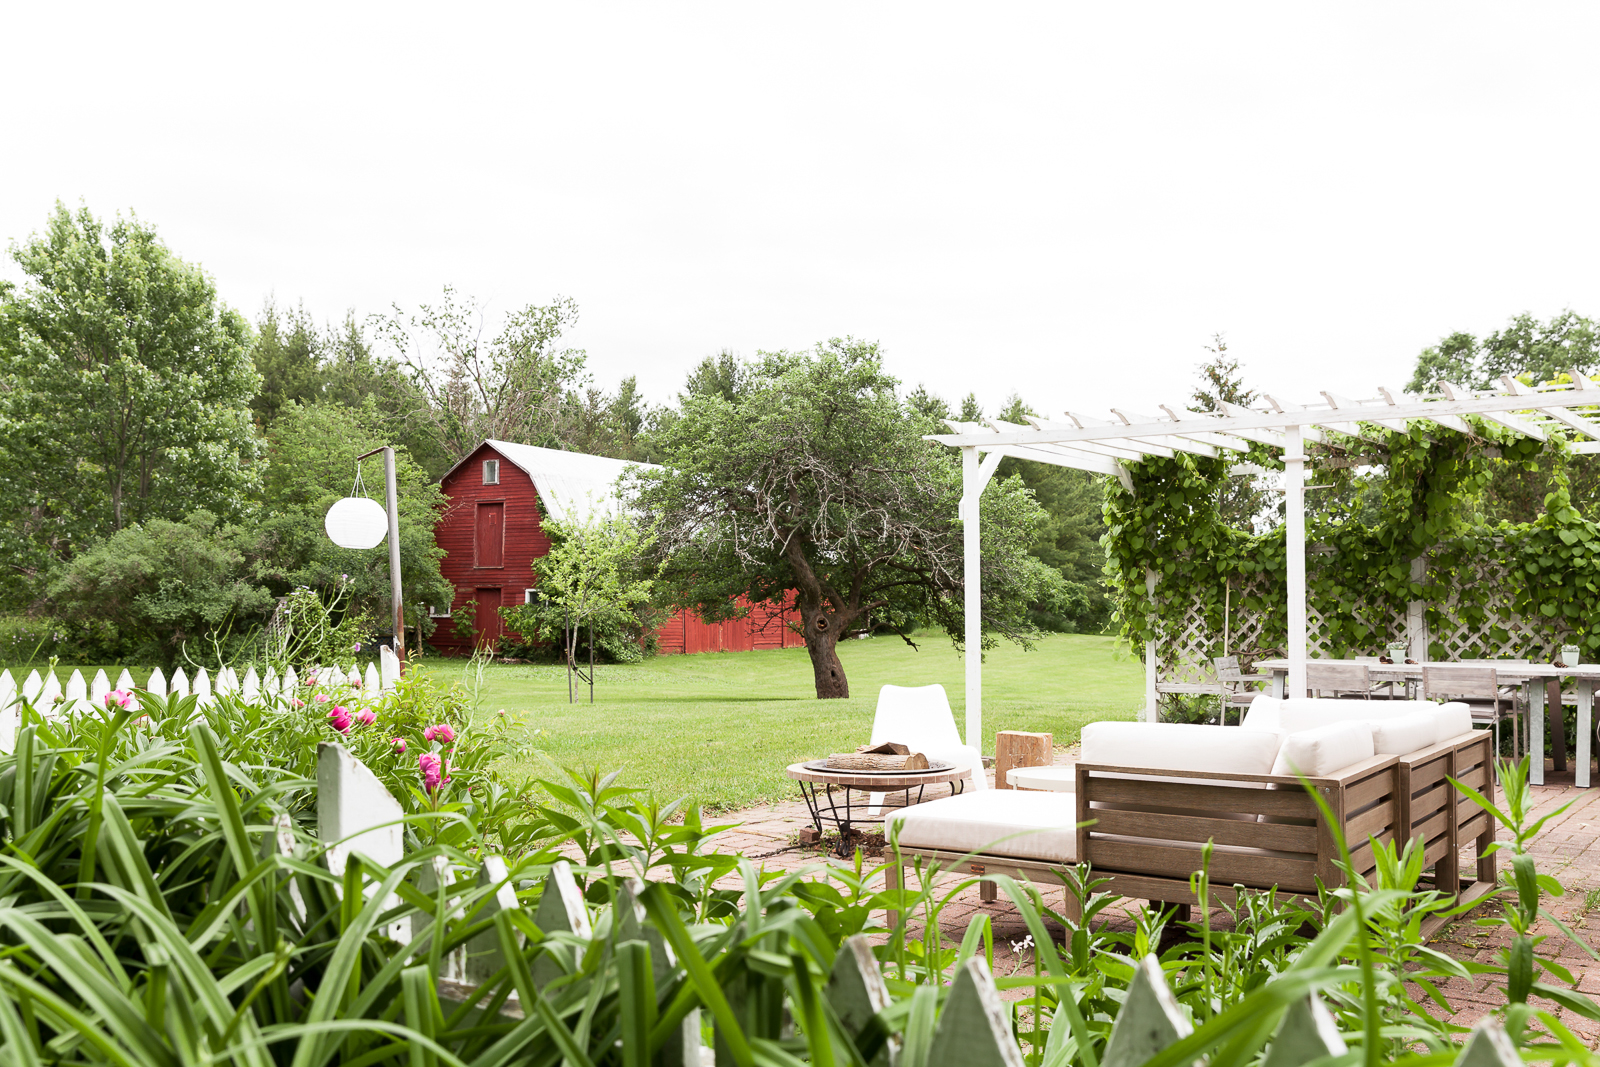 Backyard of rental property in Prince Edward County with a red barn and patio.